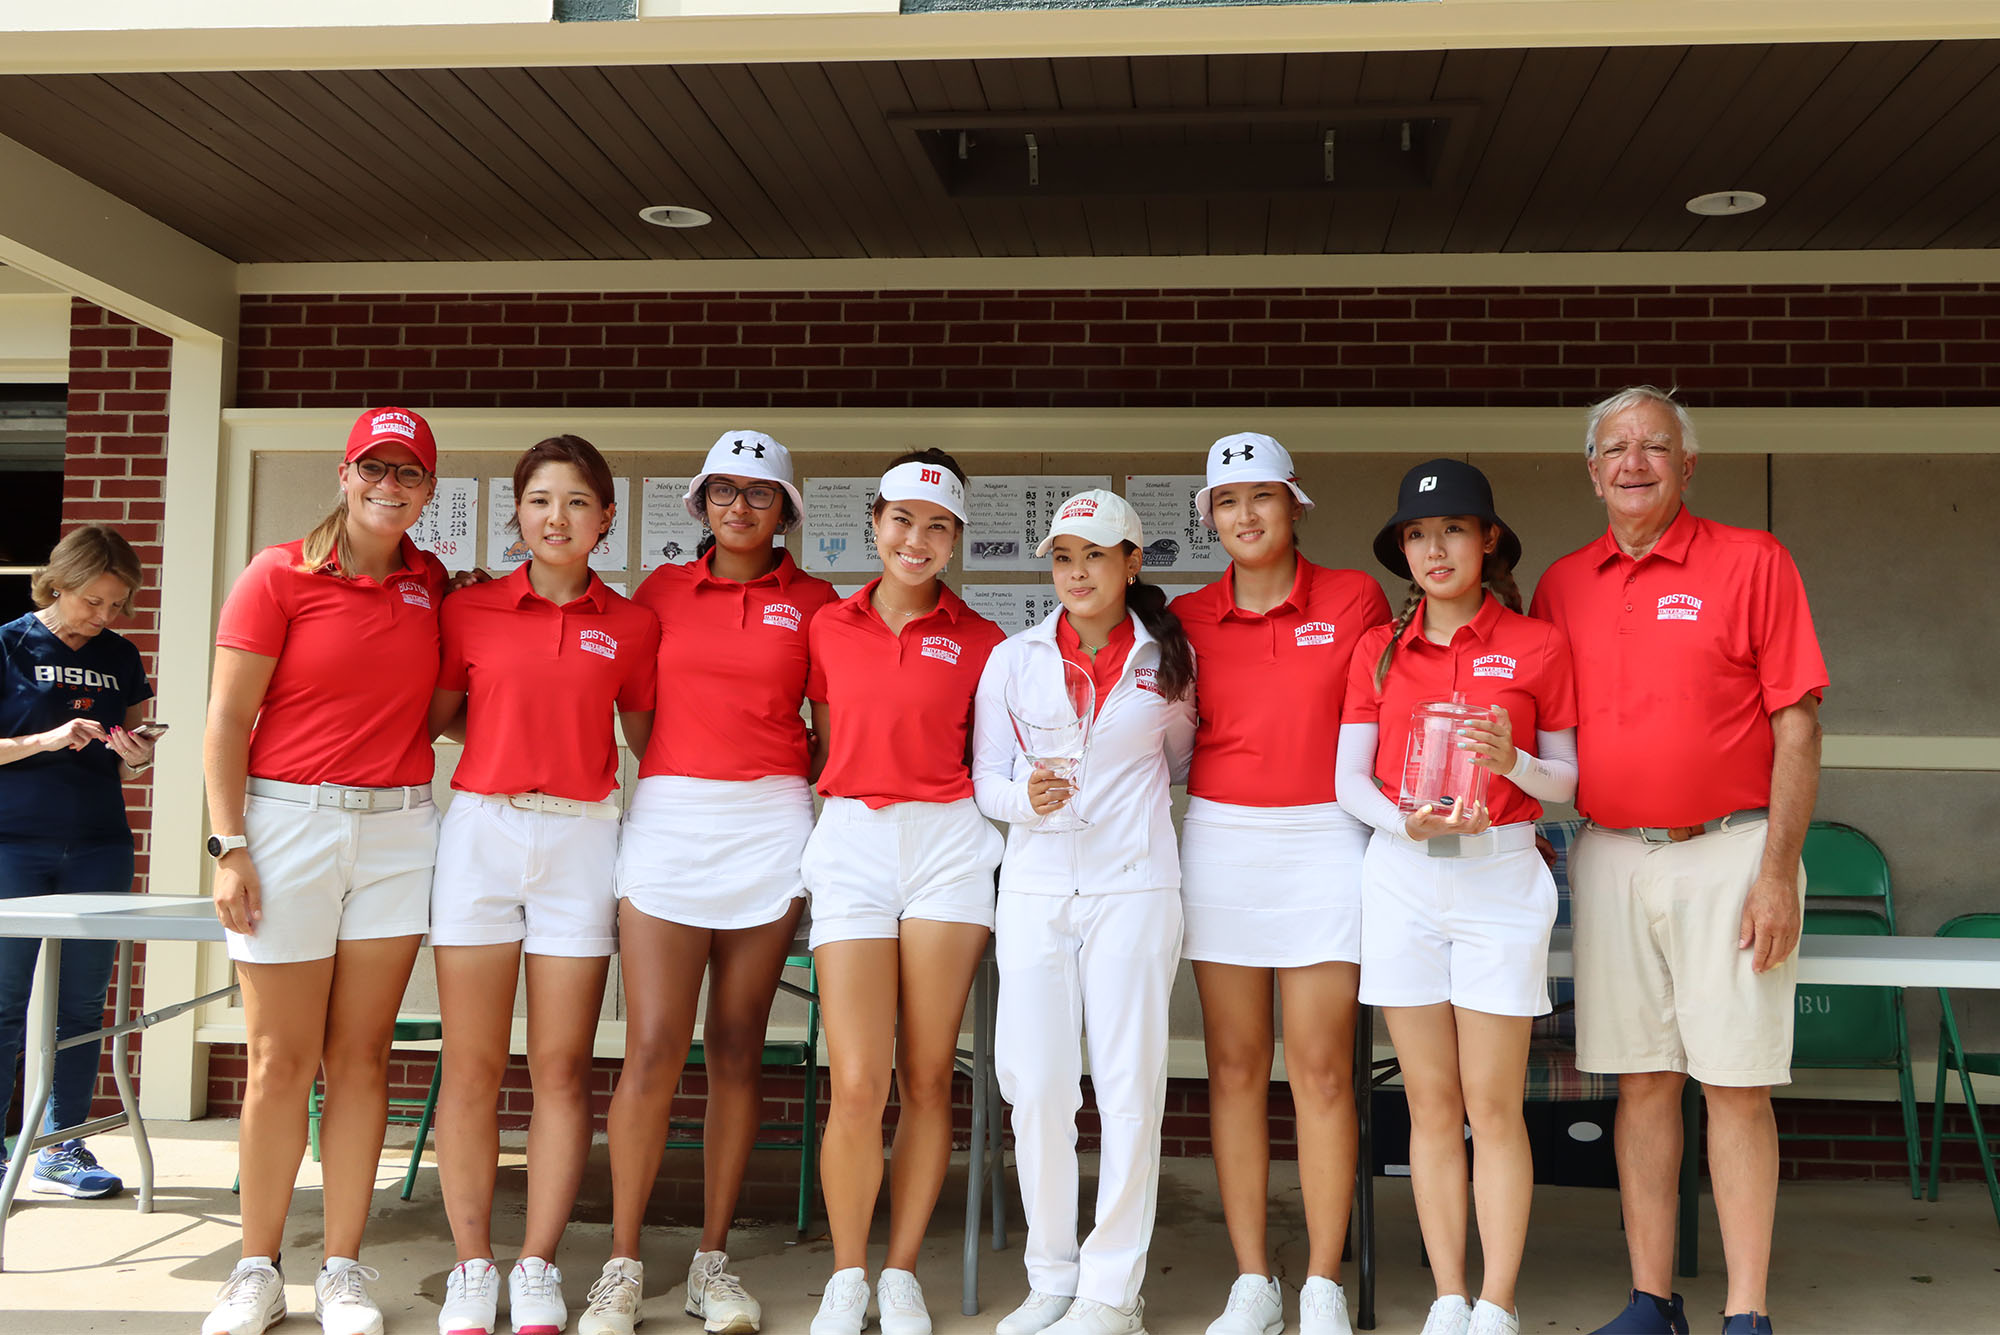 Members of the Boston University women’s golf team after capturing the Bucknell Invitational in Lewisburg, Pa., in September 2023. The Terriers will play the same course this weekend for the Patriot League championship. Pictured above: assistant coach Claire Edwards (left), Hibiki Adachi (CAS’27), Annika Manjunath (CAS’25), Madison Takai (Questrom’27), Victoria Takai (Questrom’25), Meiqi Gao (COM’25), Christy Chen (CAS’25) and head coach Bruce Chalas. Photo courtesy of Bucknell Athletics